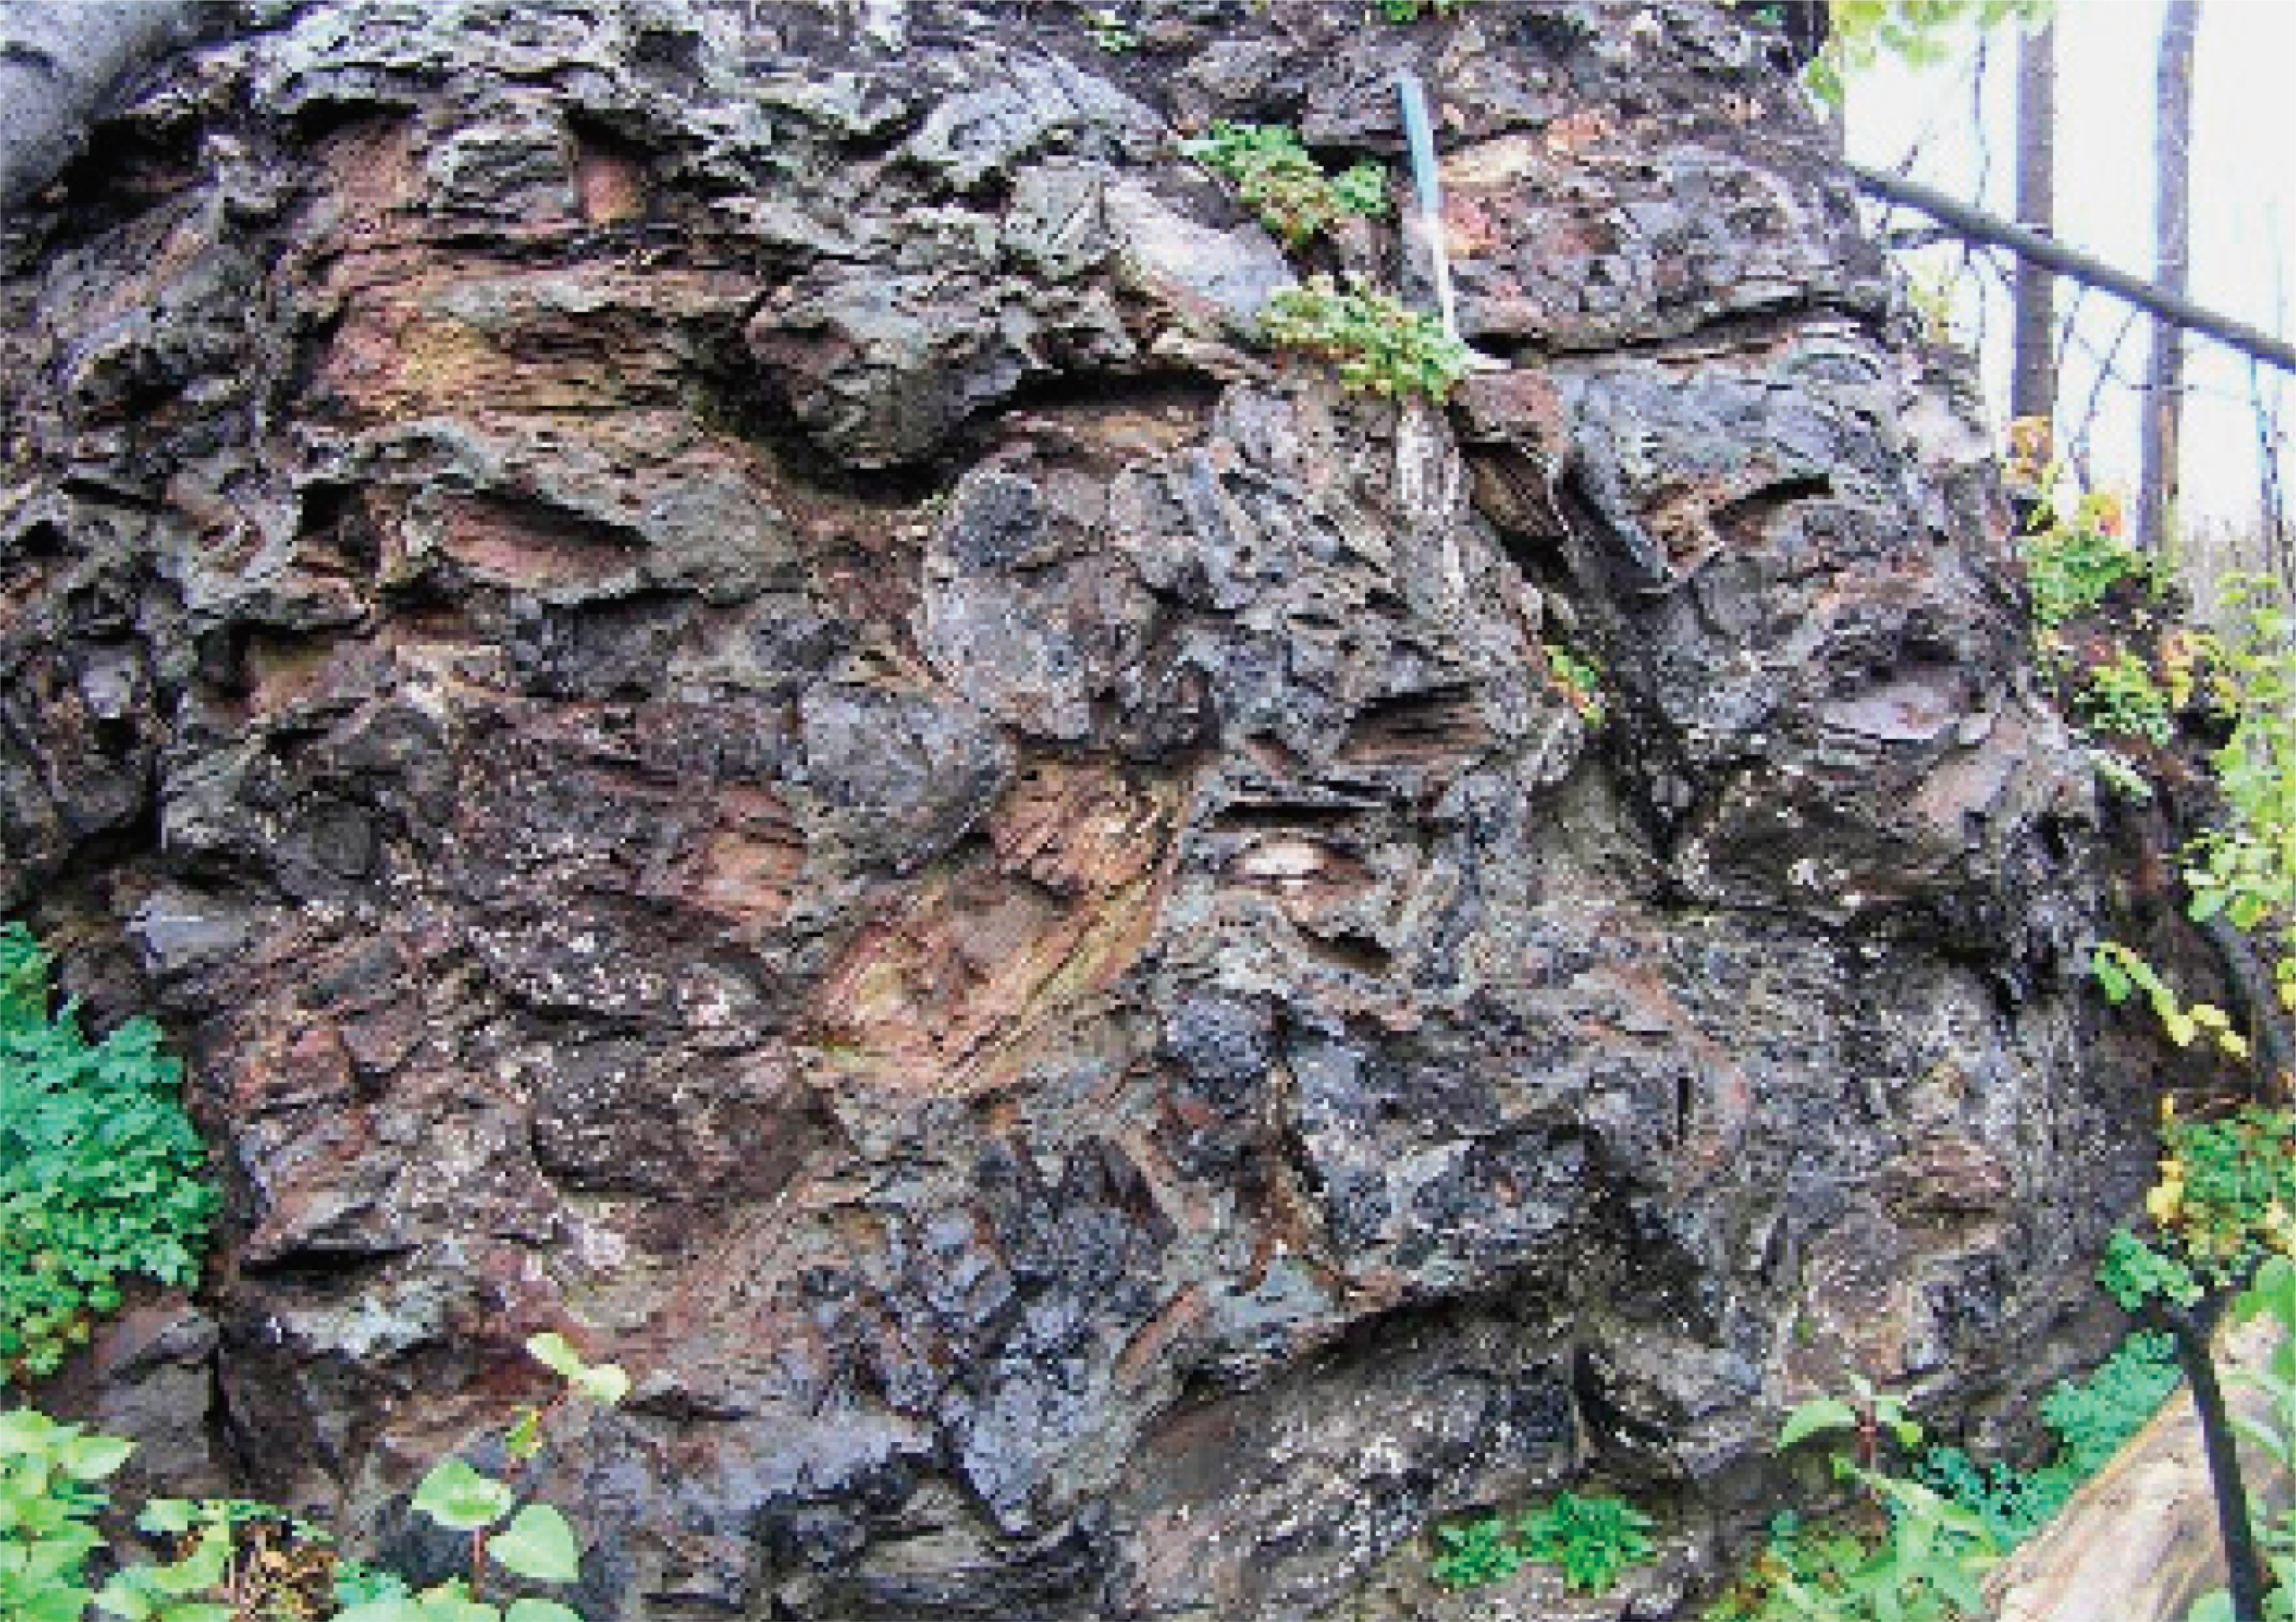 Breccia containing large fragments of Gunflint Iron Formation. Hammer for scale is 16 inches long.